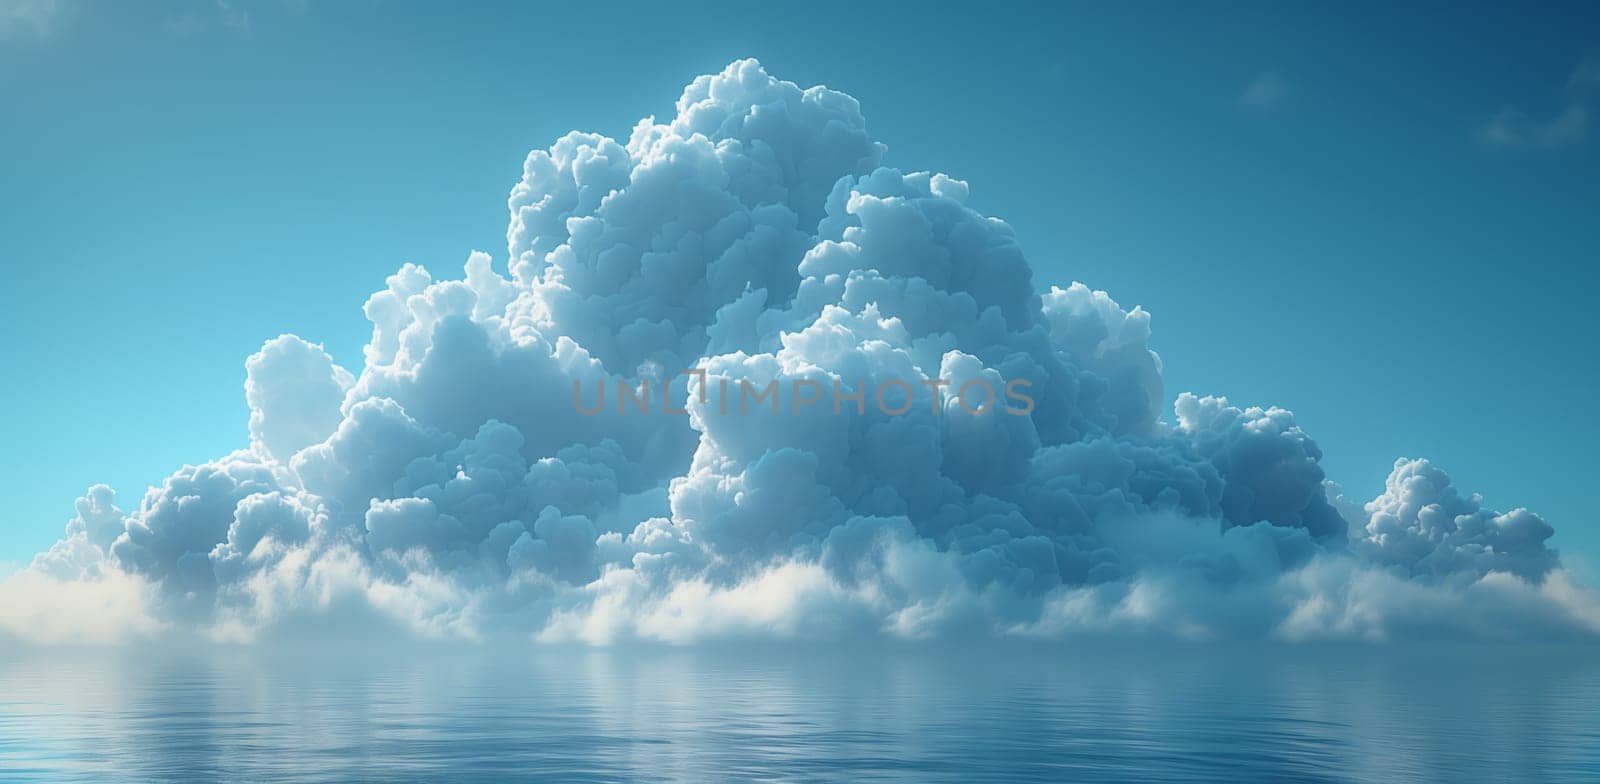 Cumulus cloud hovers above lake in serene natural landscape by richwolf